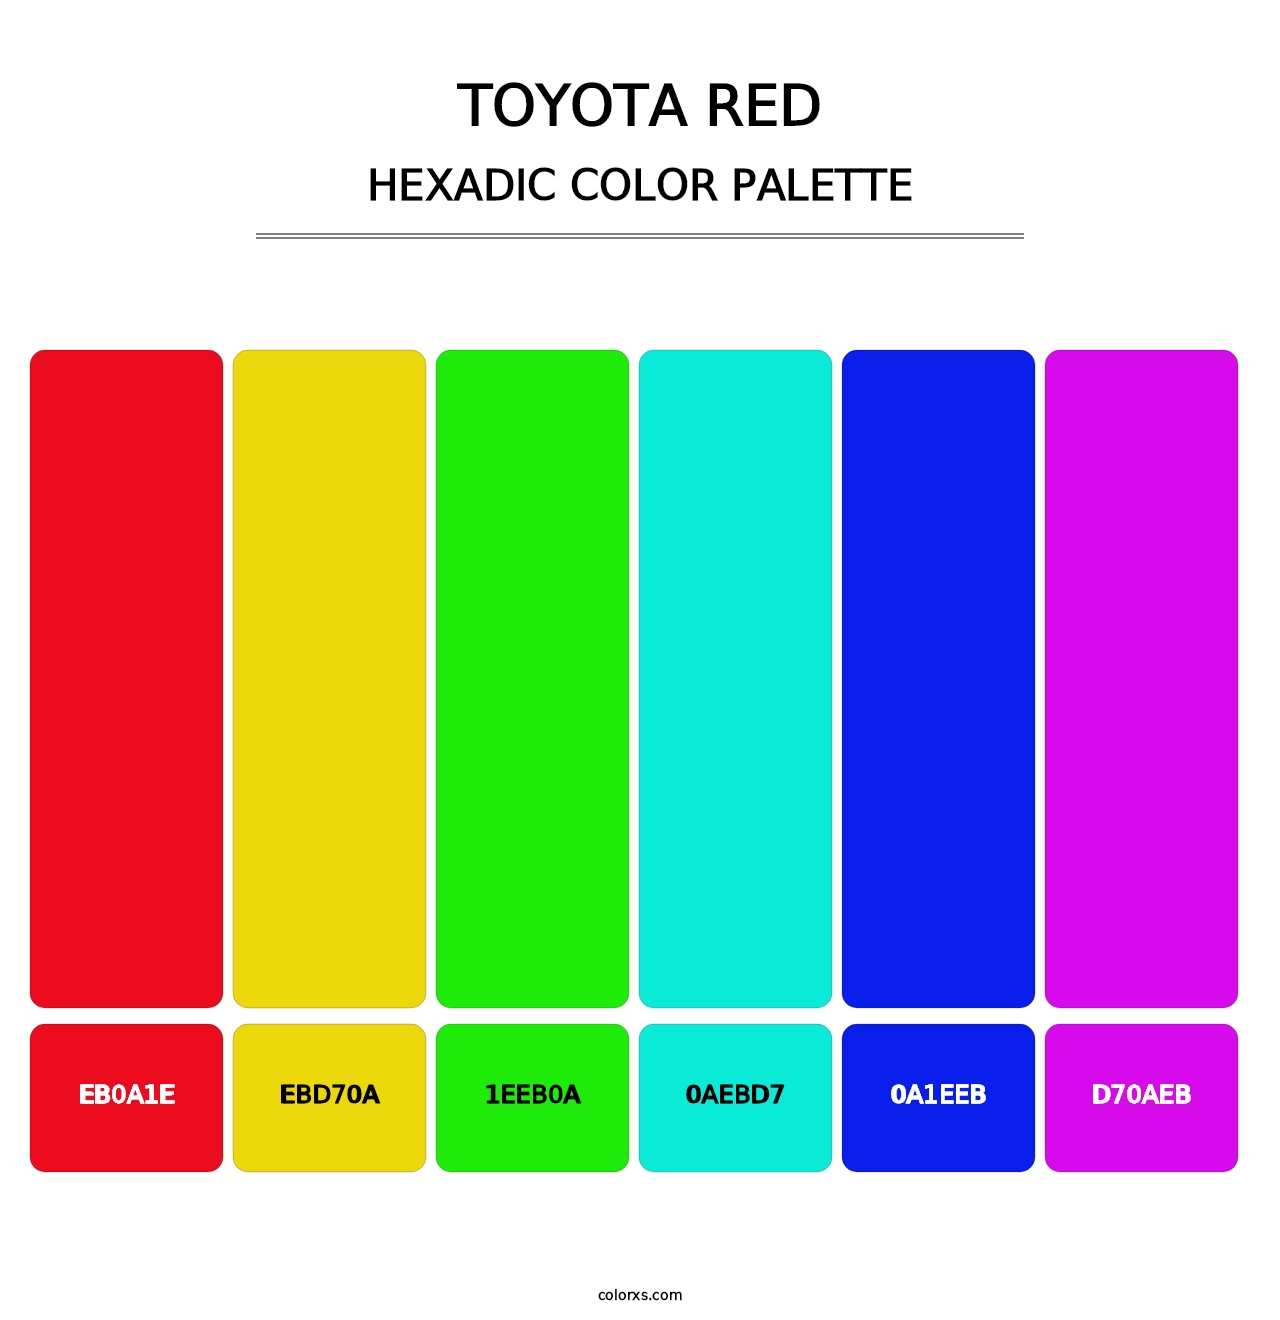 Toyota Red - Hexadic Color Palette